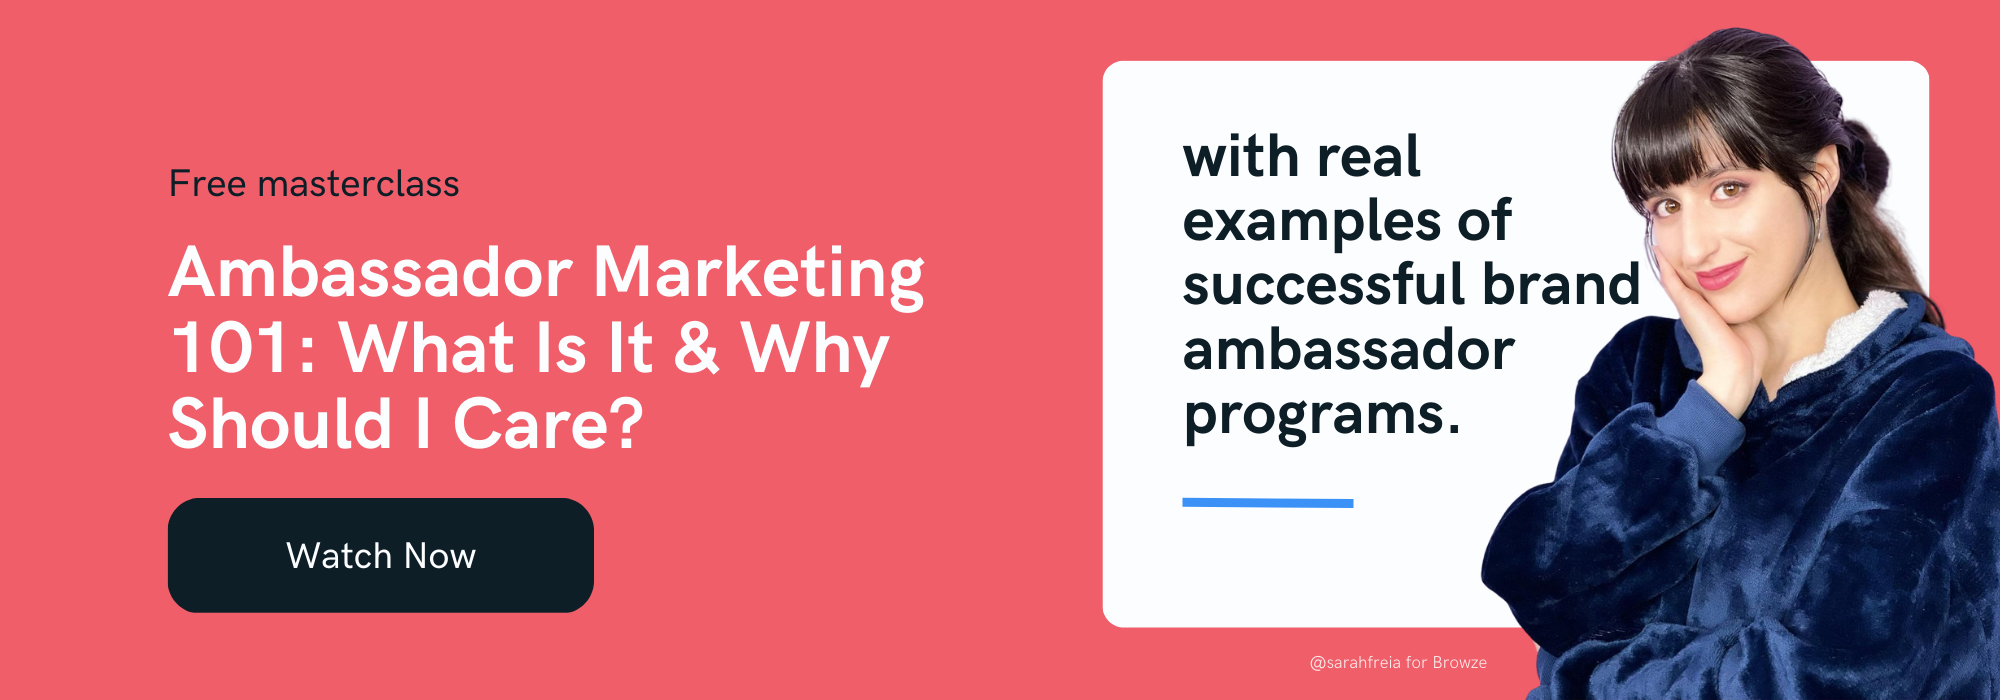 Ambassador Marketing 101 What Is It & Why Should I Care